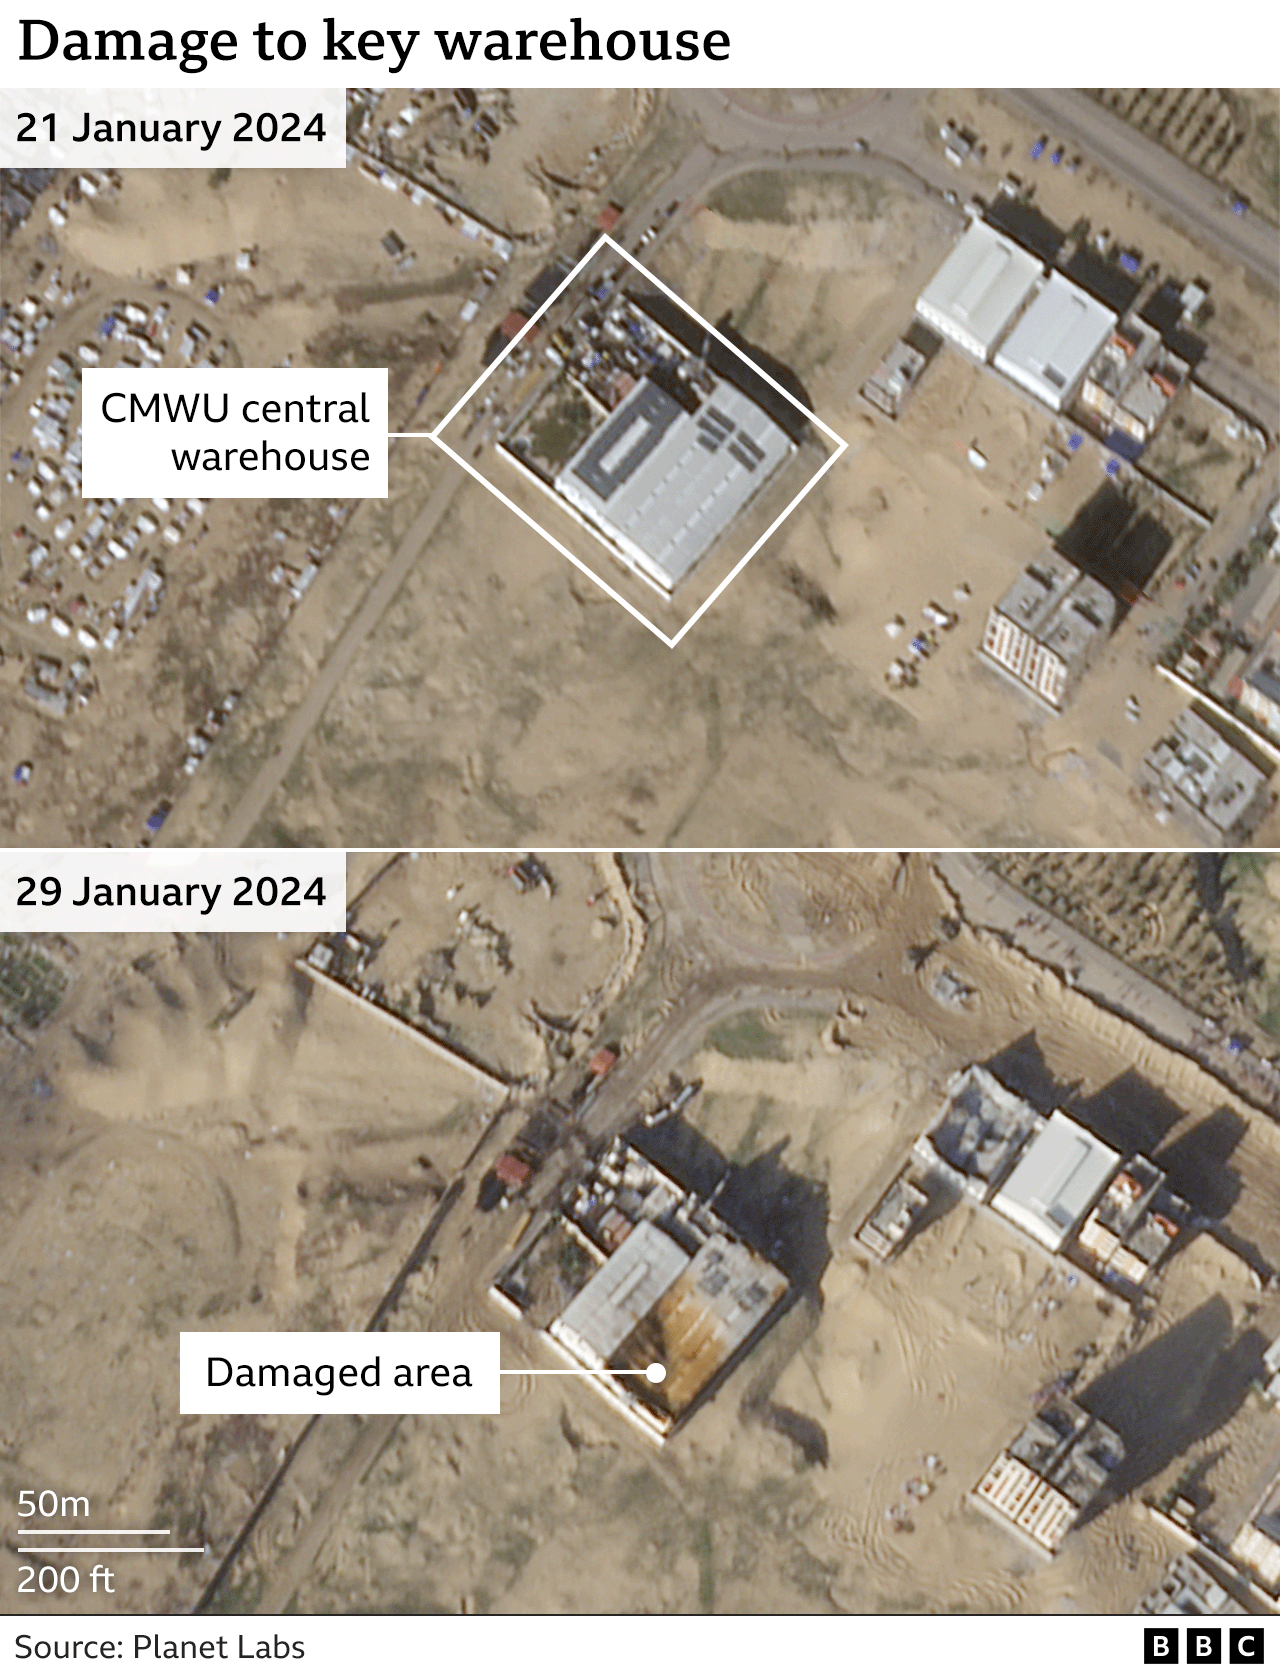 A before and after satellite image of damage to the CMWU central warehouse from 21 January 2024 and 29 January 2024. It shows damage to the roof in the after photo.